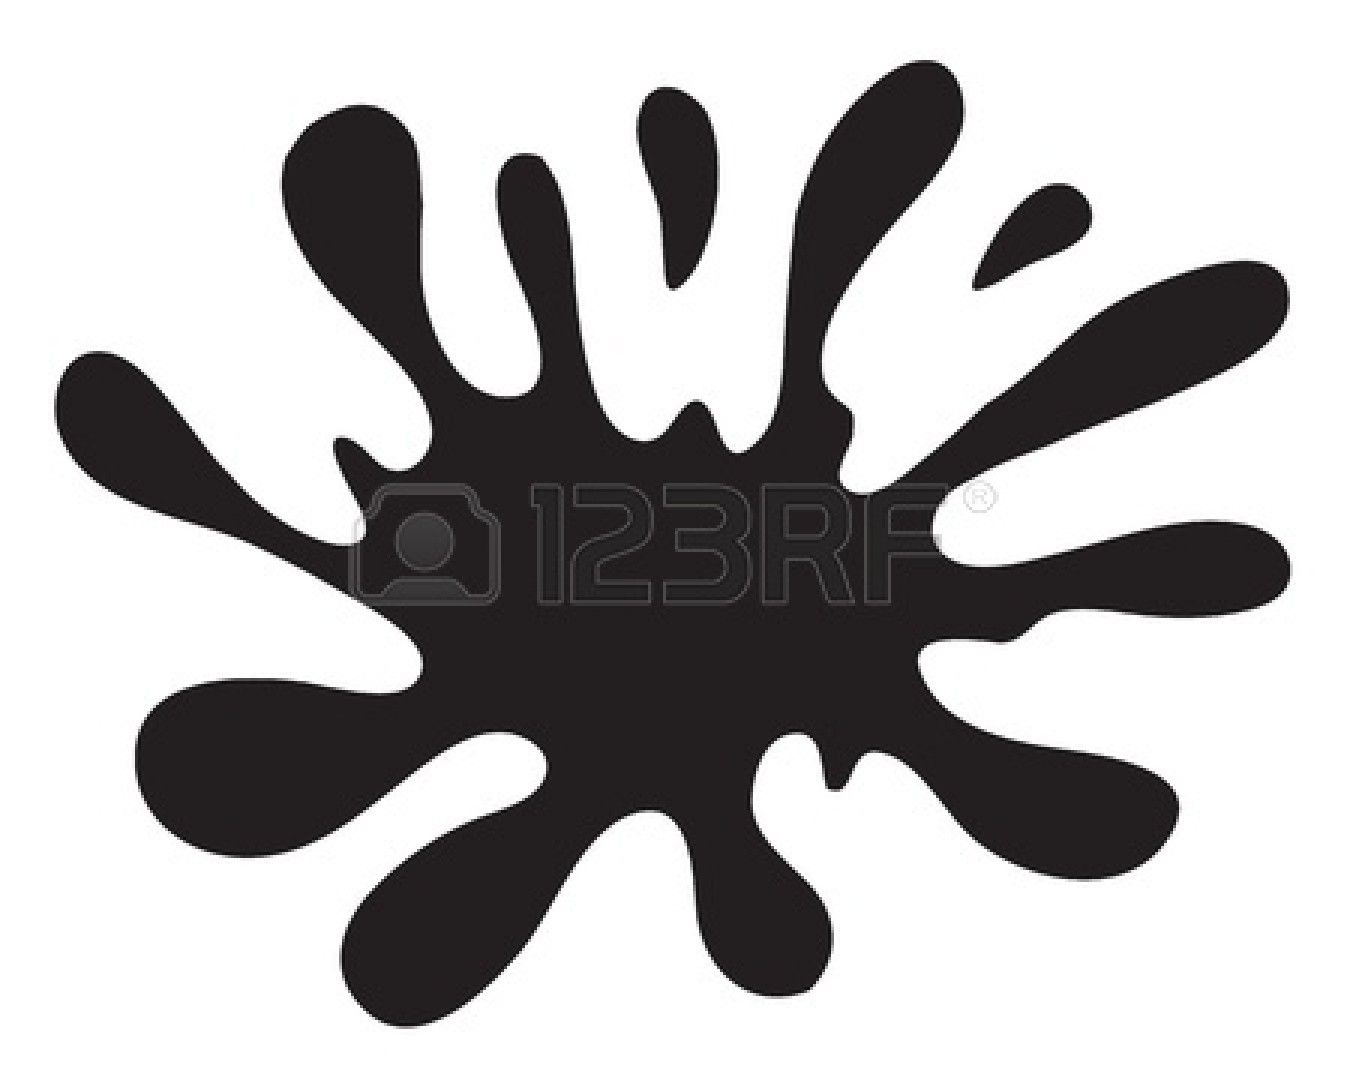 free clipart images in black and white - photo #10